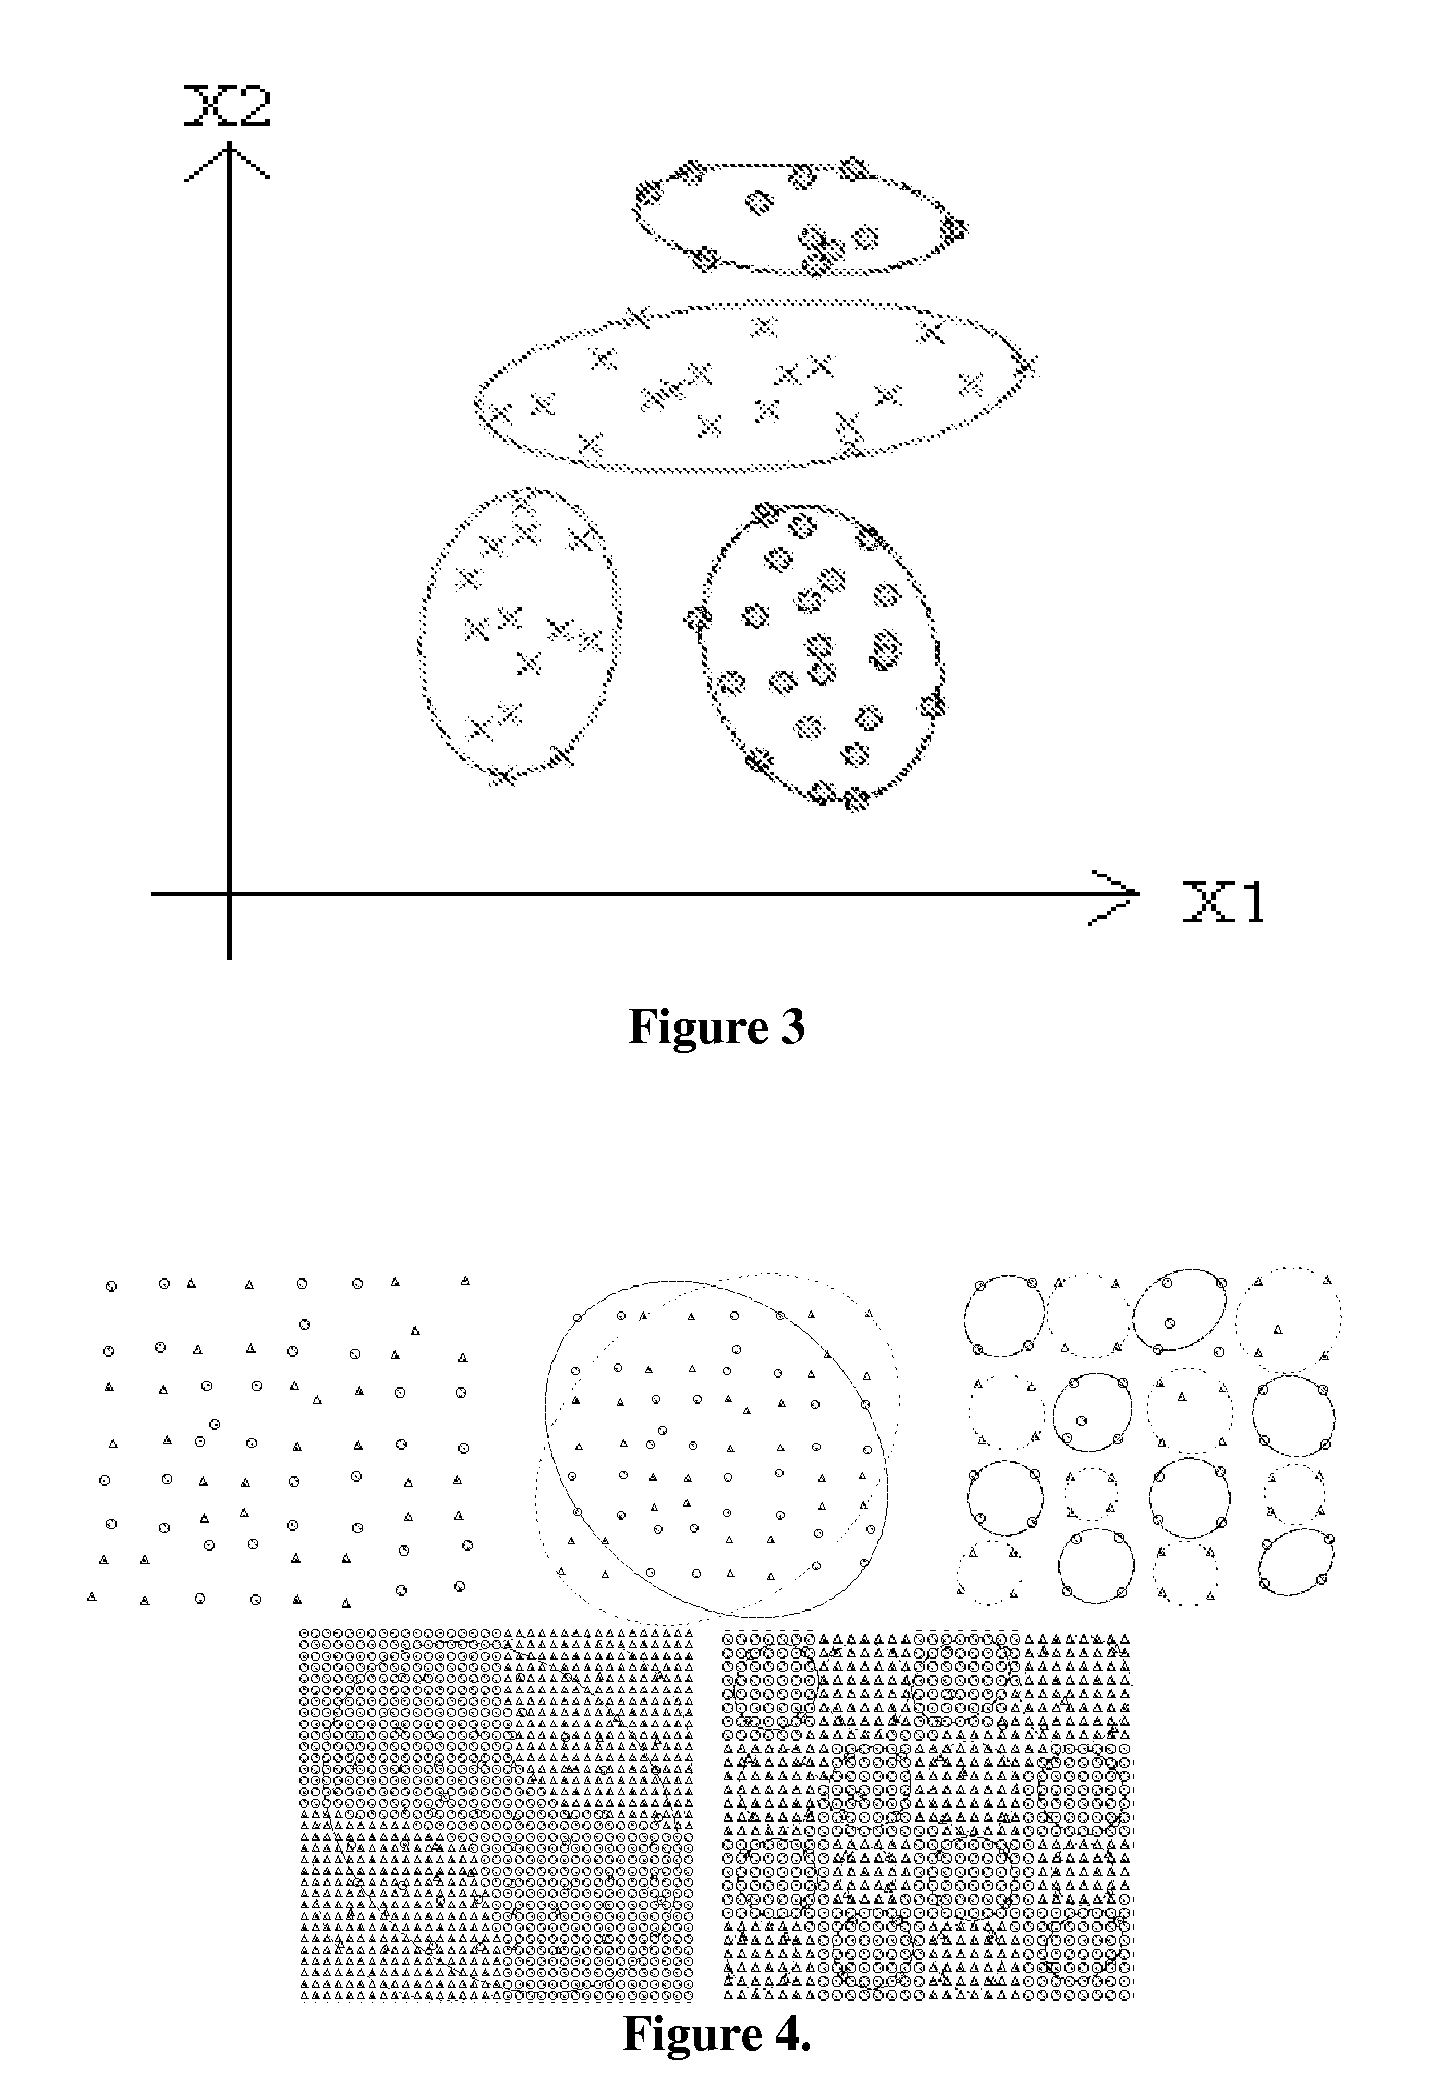 Apparatus and method for organization, segmentation, characterization, and discrimination of complex data sets from multi-heterogeneous sources